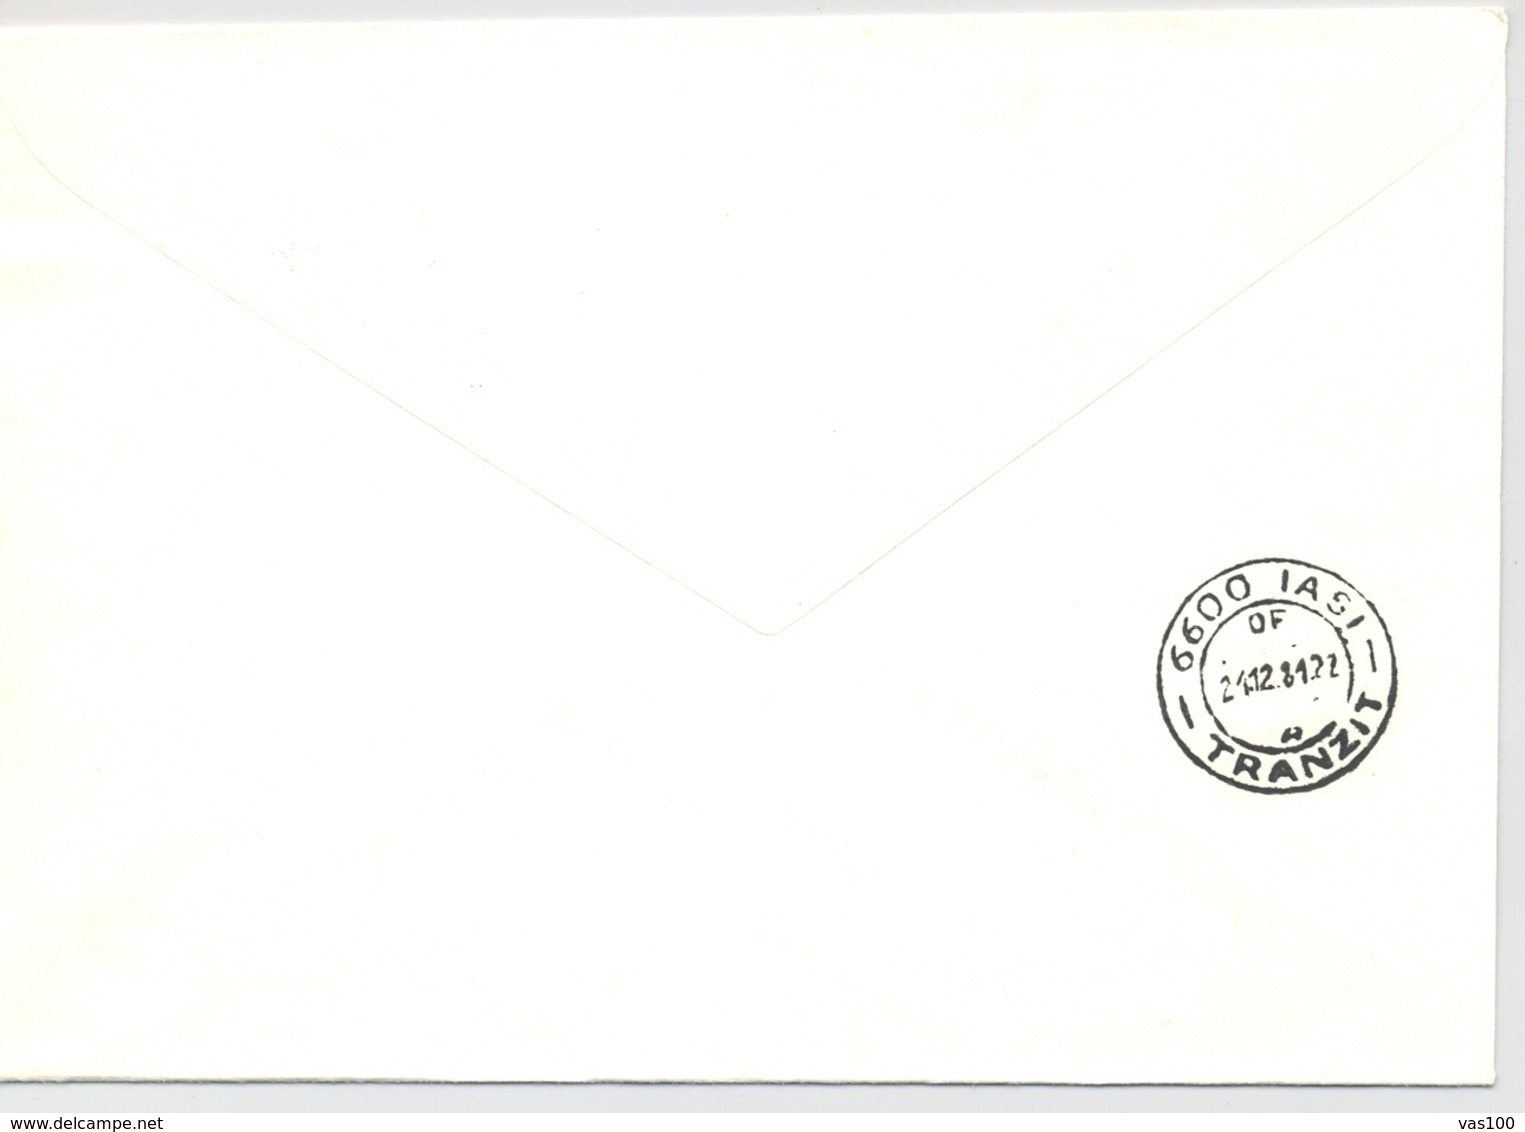 PEACE ON EARTH PHILATELIC EXHIBITION SPECIAL POSTMARK, ENDLESS COLUMN STAMP ON COVER, 1981, ROMANIA - Briefe U. Dokumente